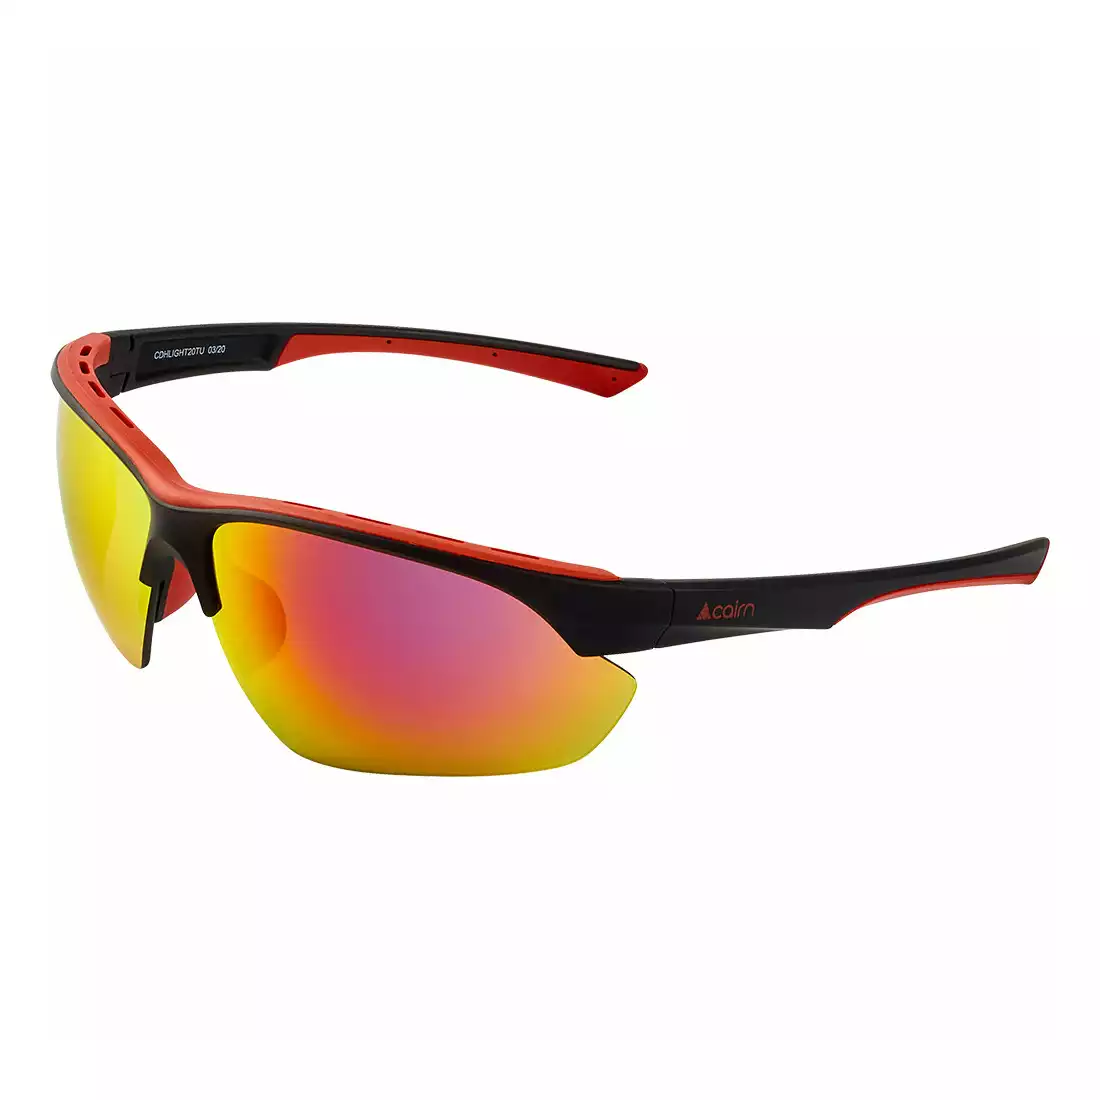 CAIRN DH LIGHT KAT.3 Sports glasses, red